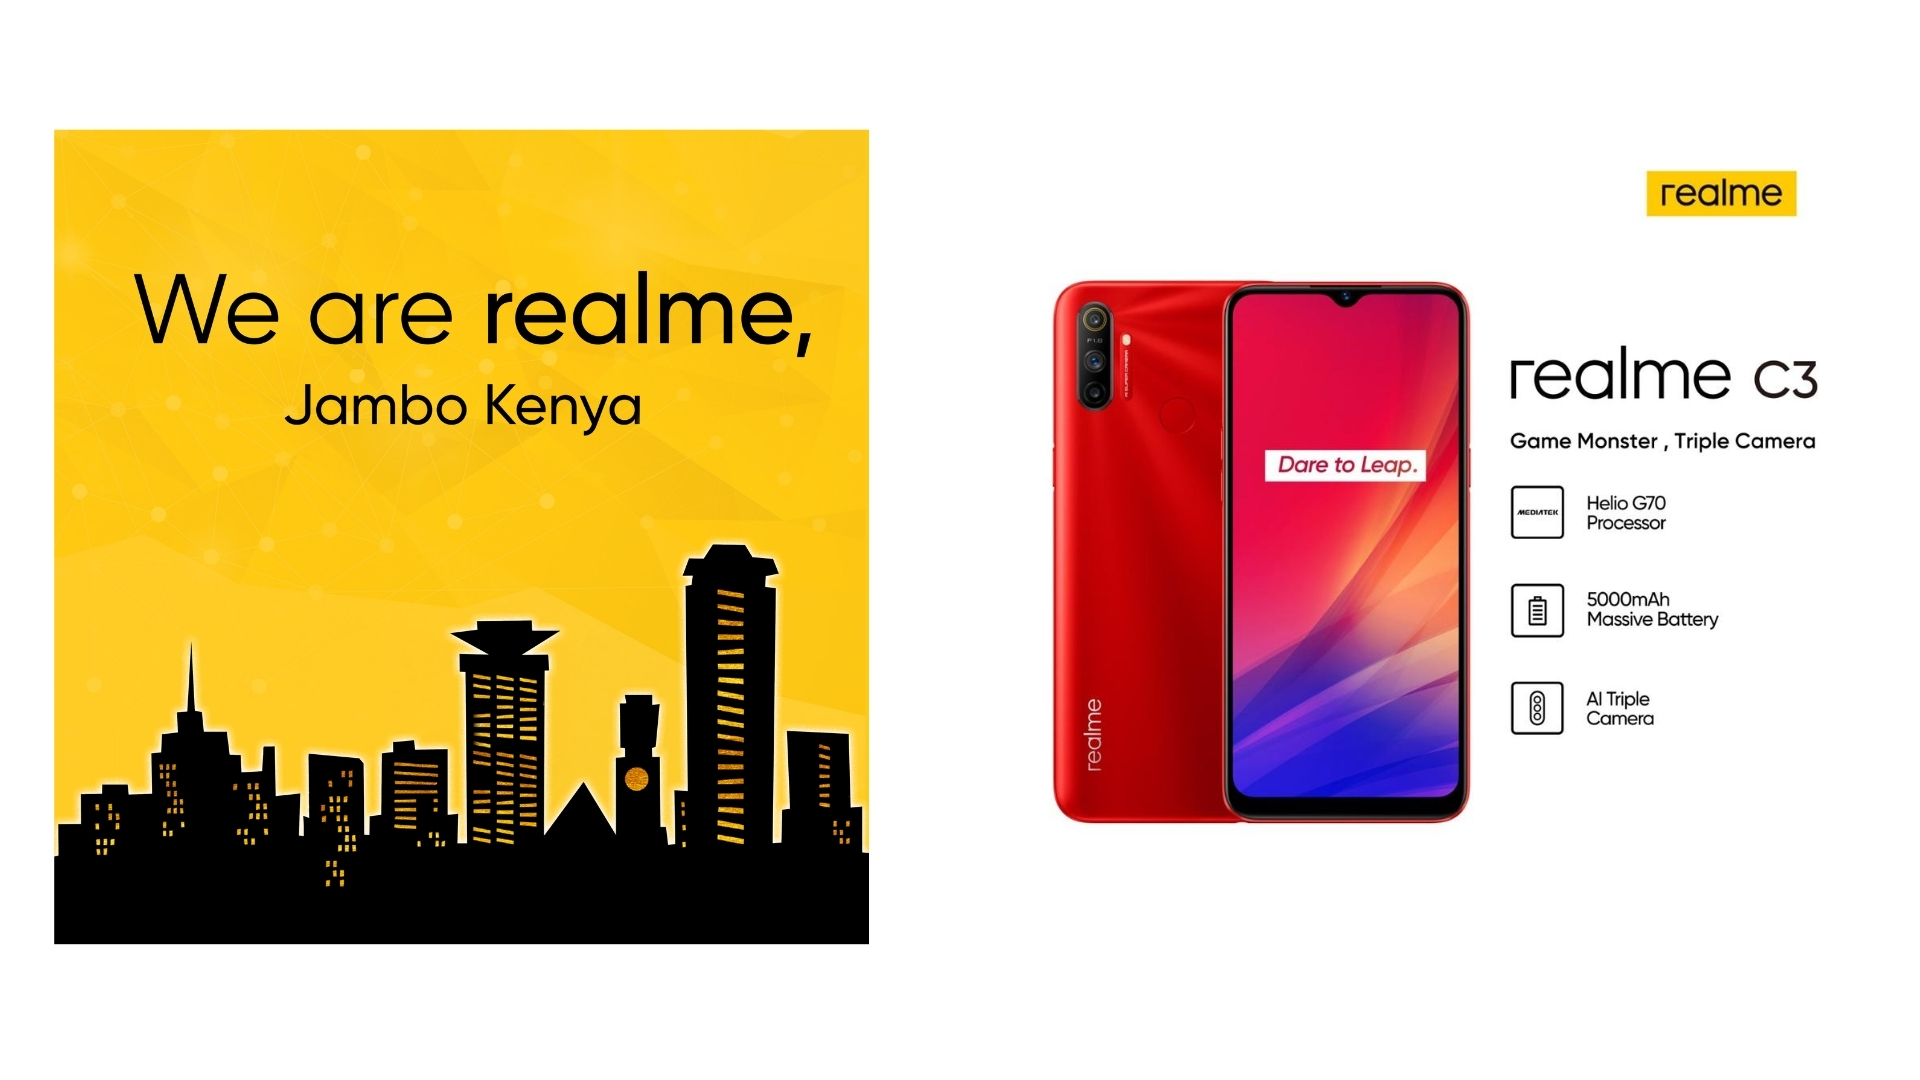 RealMe, one of the companies under BBK Electronics has now officially setup shop in Kenya. Their first device for the Kenyan market will be the RealMe C2. BBK Electronics owns OnePlus, OPPO, Vivo, and RealMe.